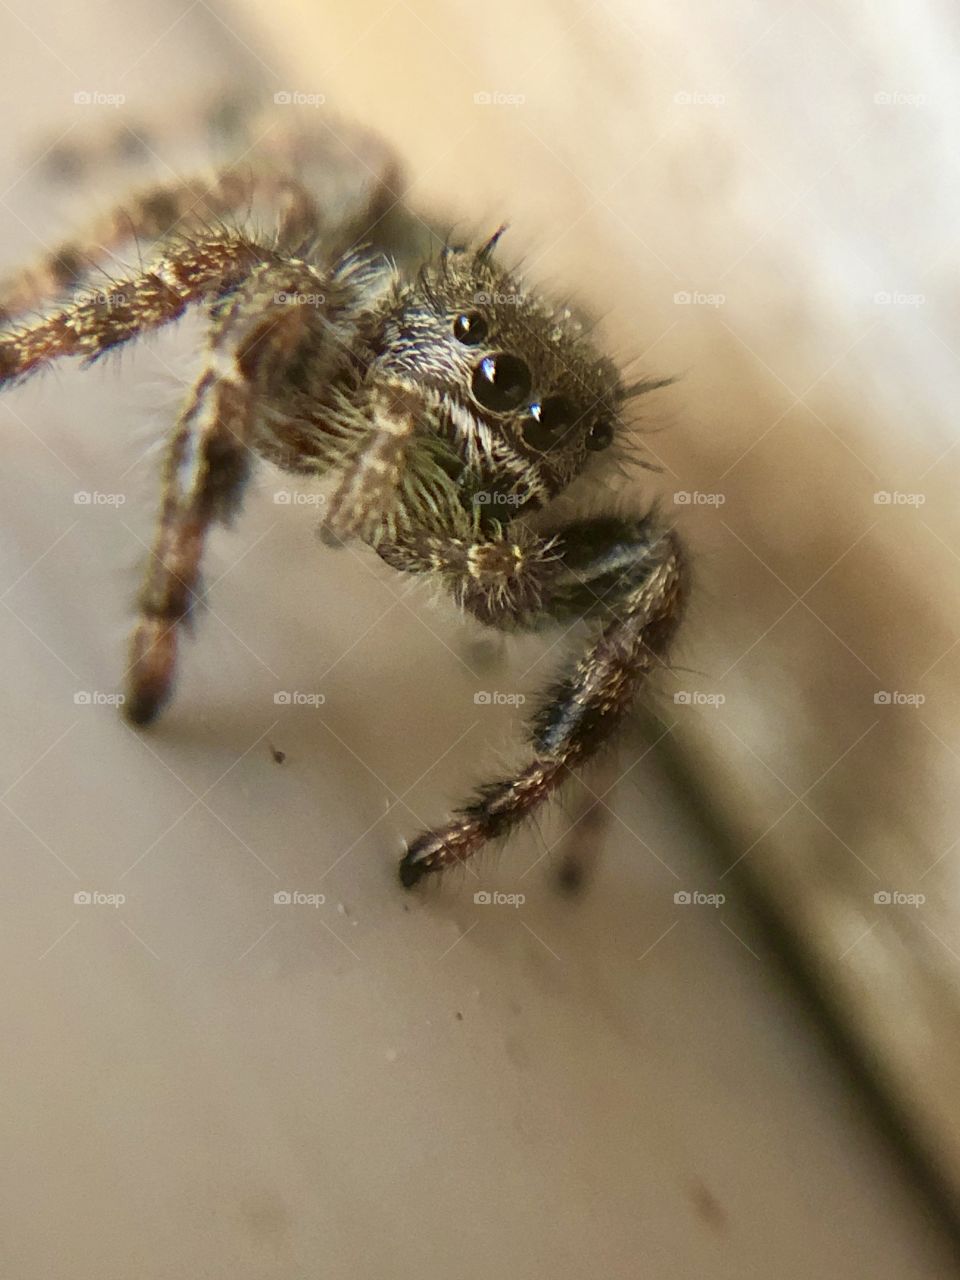 Small spider that I found in my home. He was very photogenic and still for some macro shots I was able to take